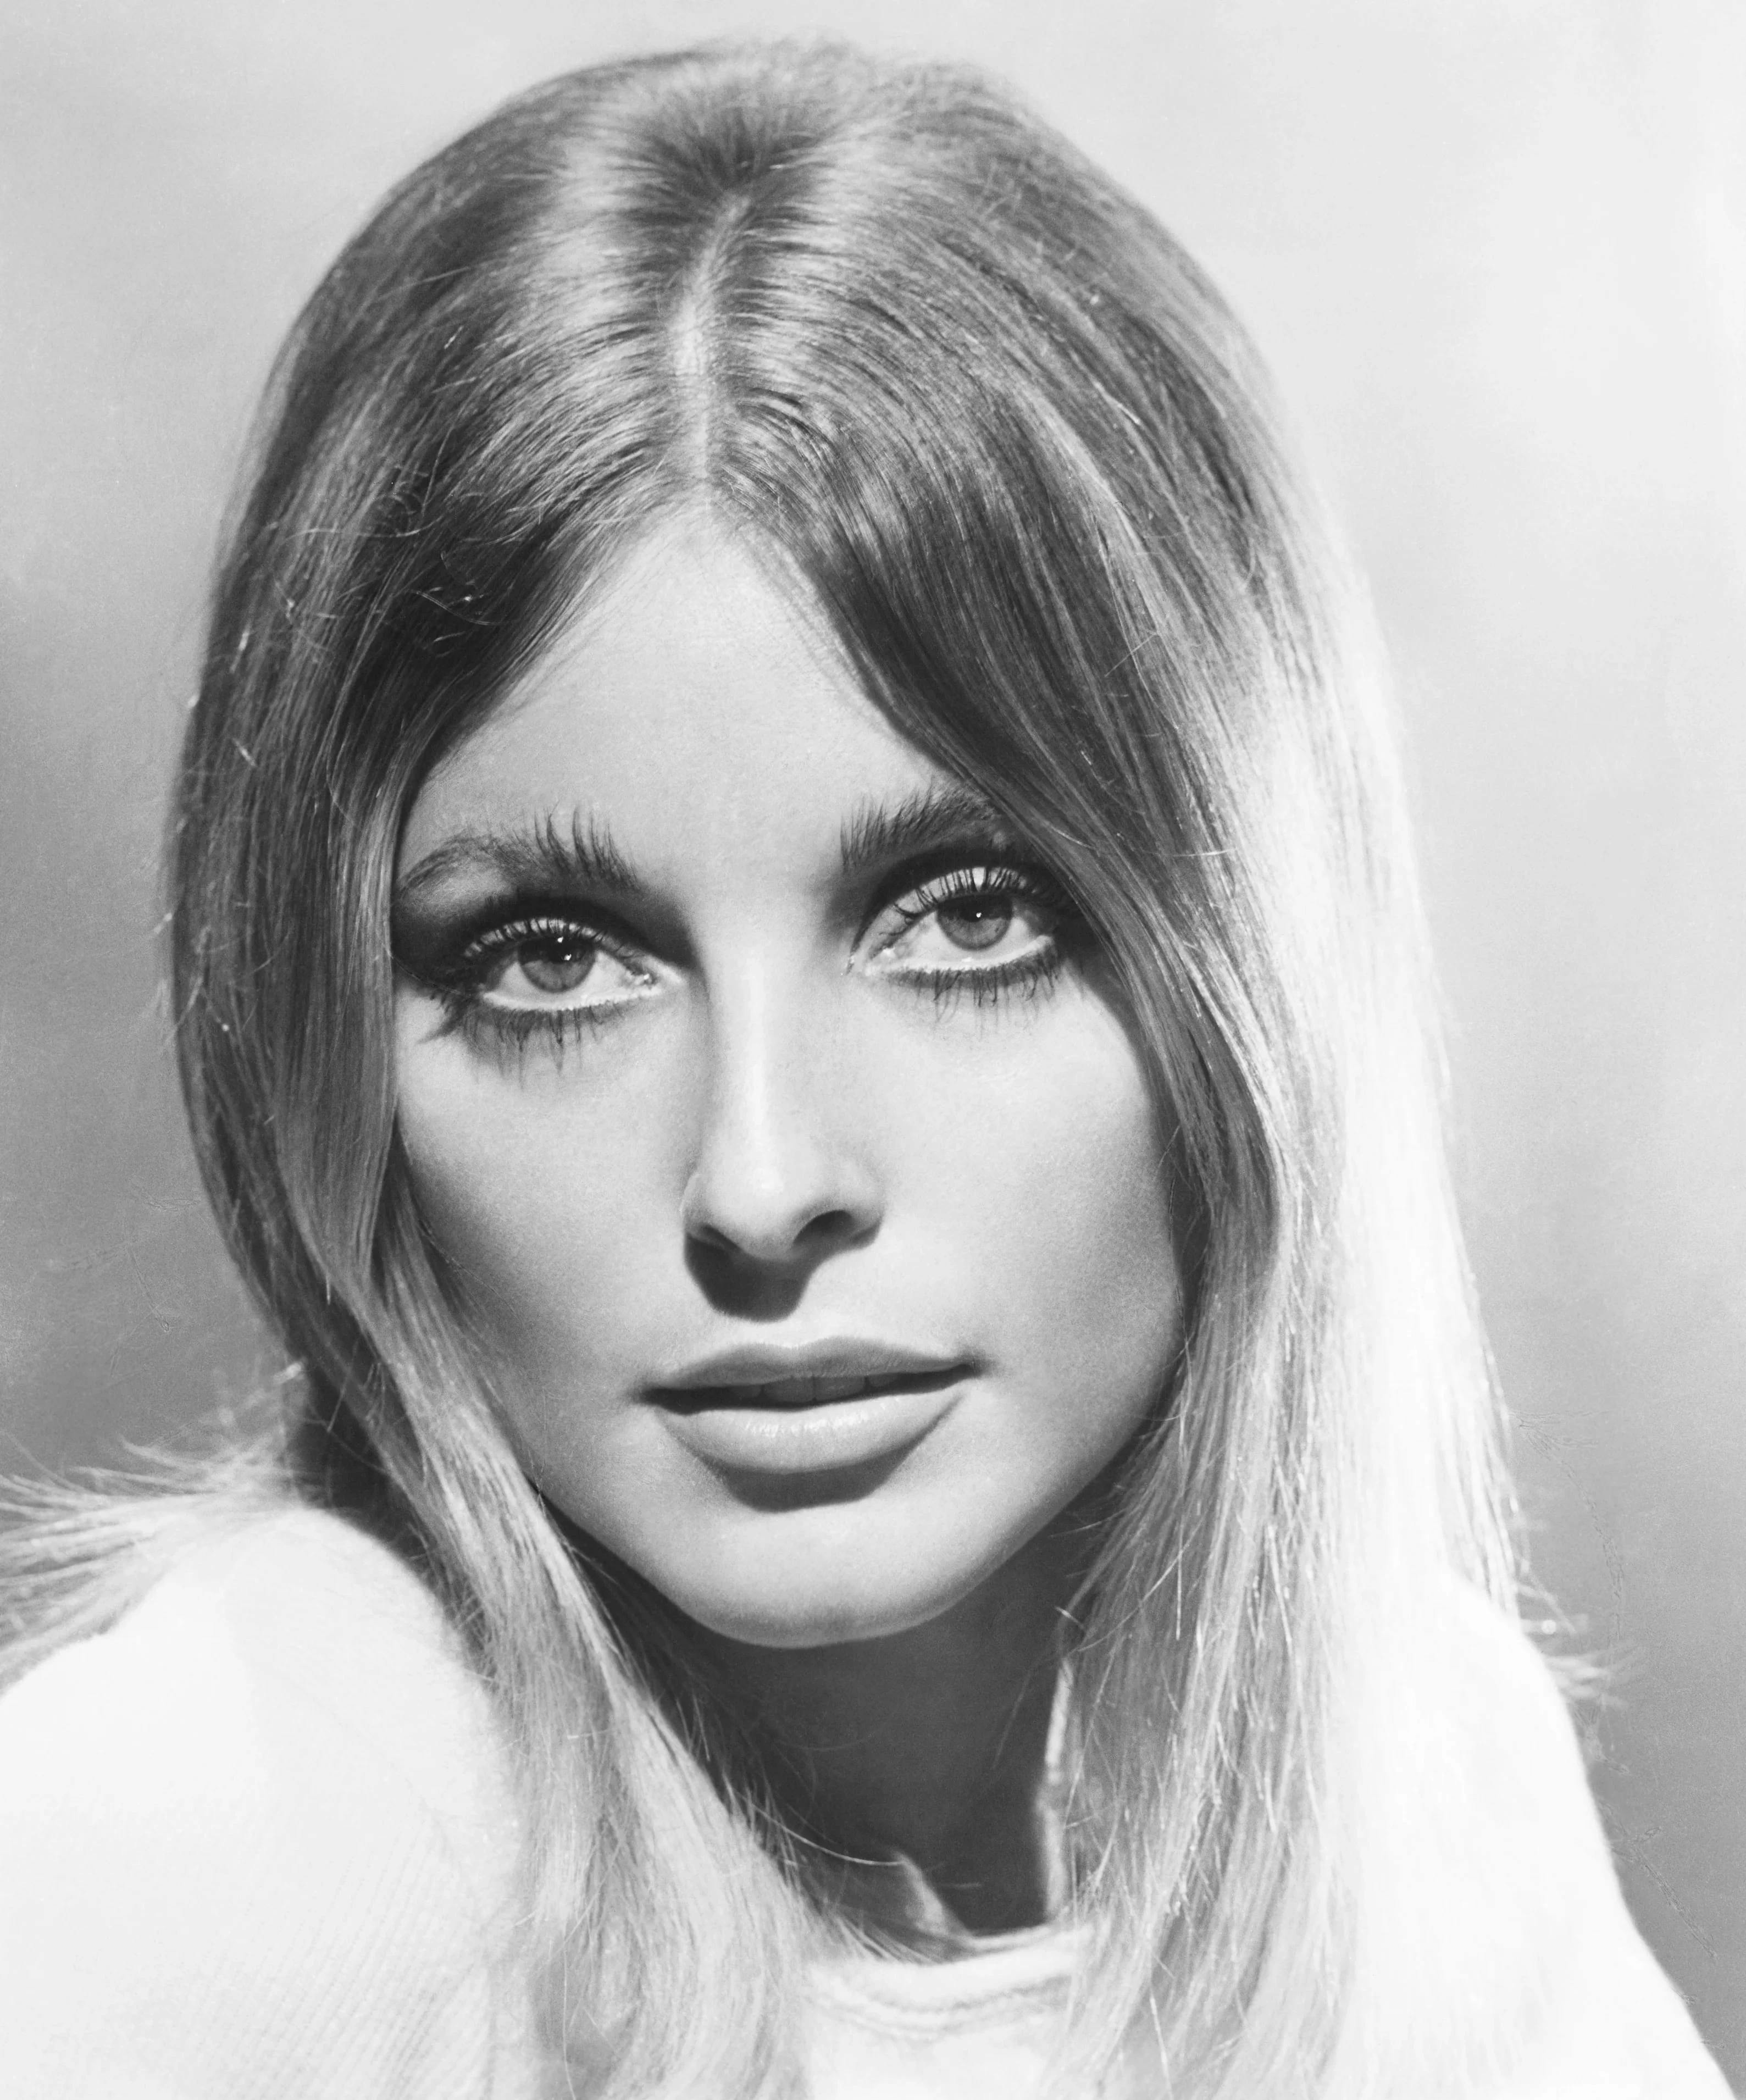 Sharon Tate from the 1967 film Valley of the Dolls. 20th Century-Fox, Public domain, via Wikimedia Commons.